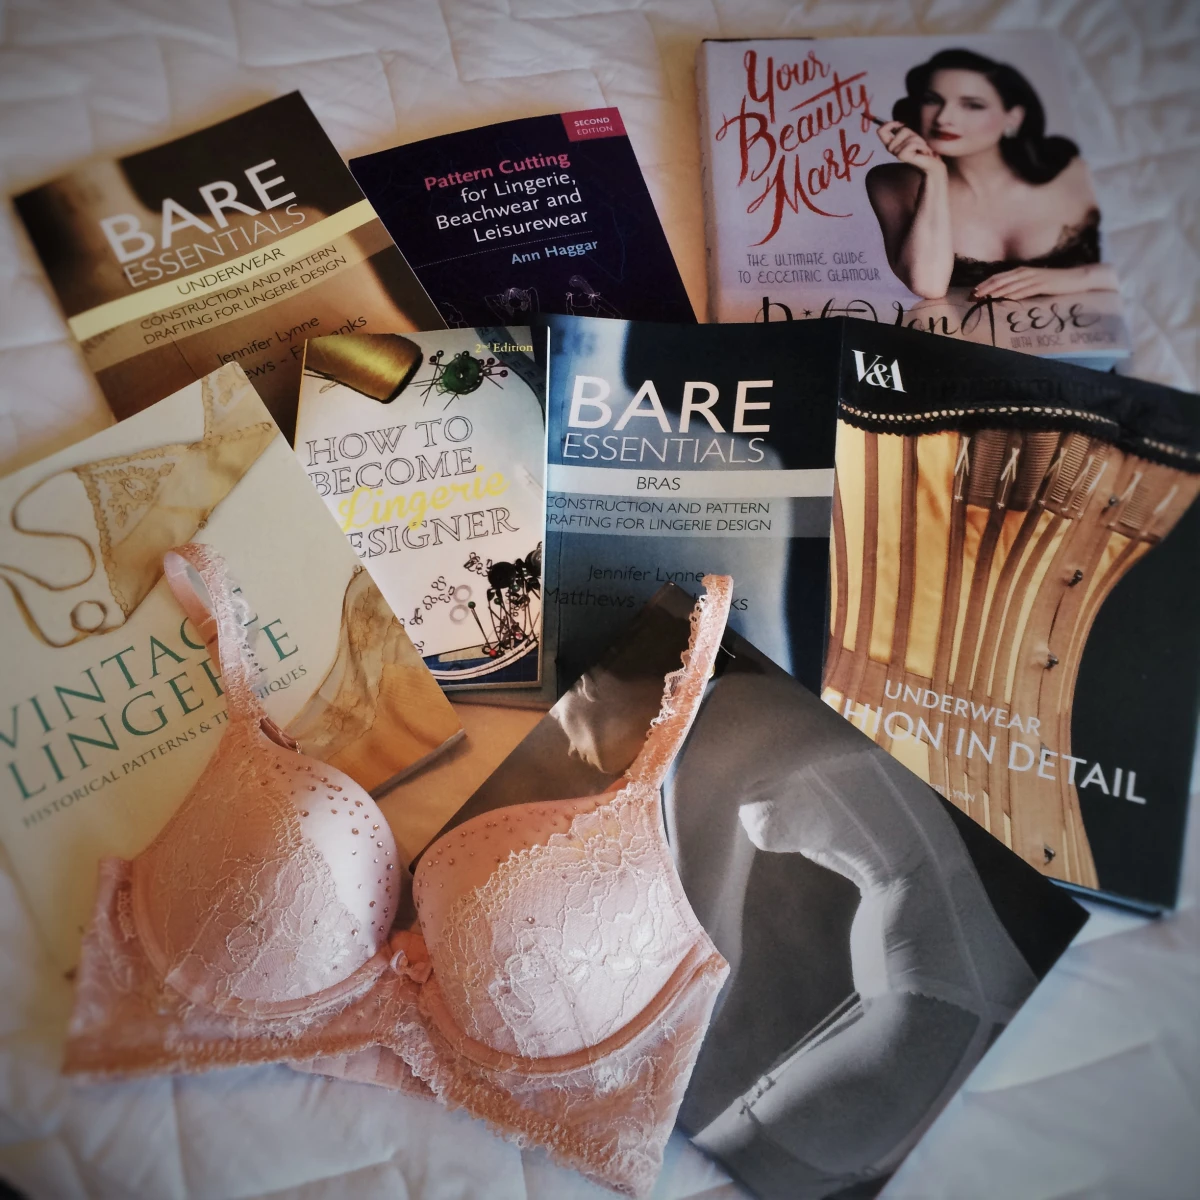 Bare Essentials: Bras Third Edition Construction and Pattern